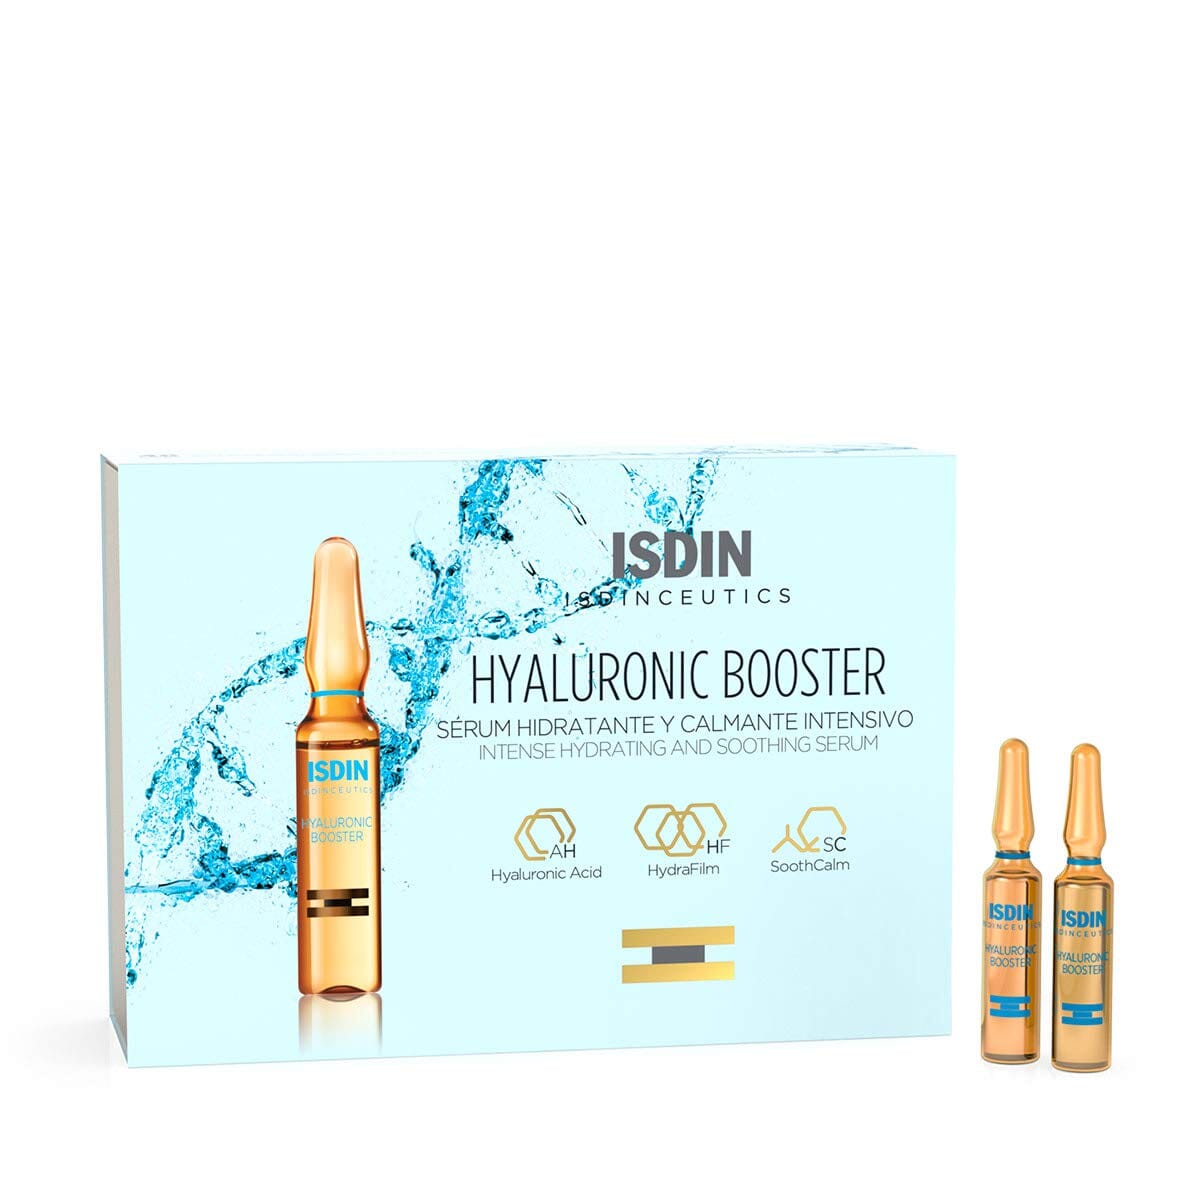 ISDIN Hyaluronic Booster 10 Ampoules ISDIN 2ml x 10 ampoules Shop at Exclusive Beauty Club